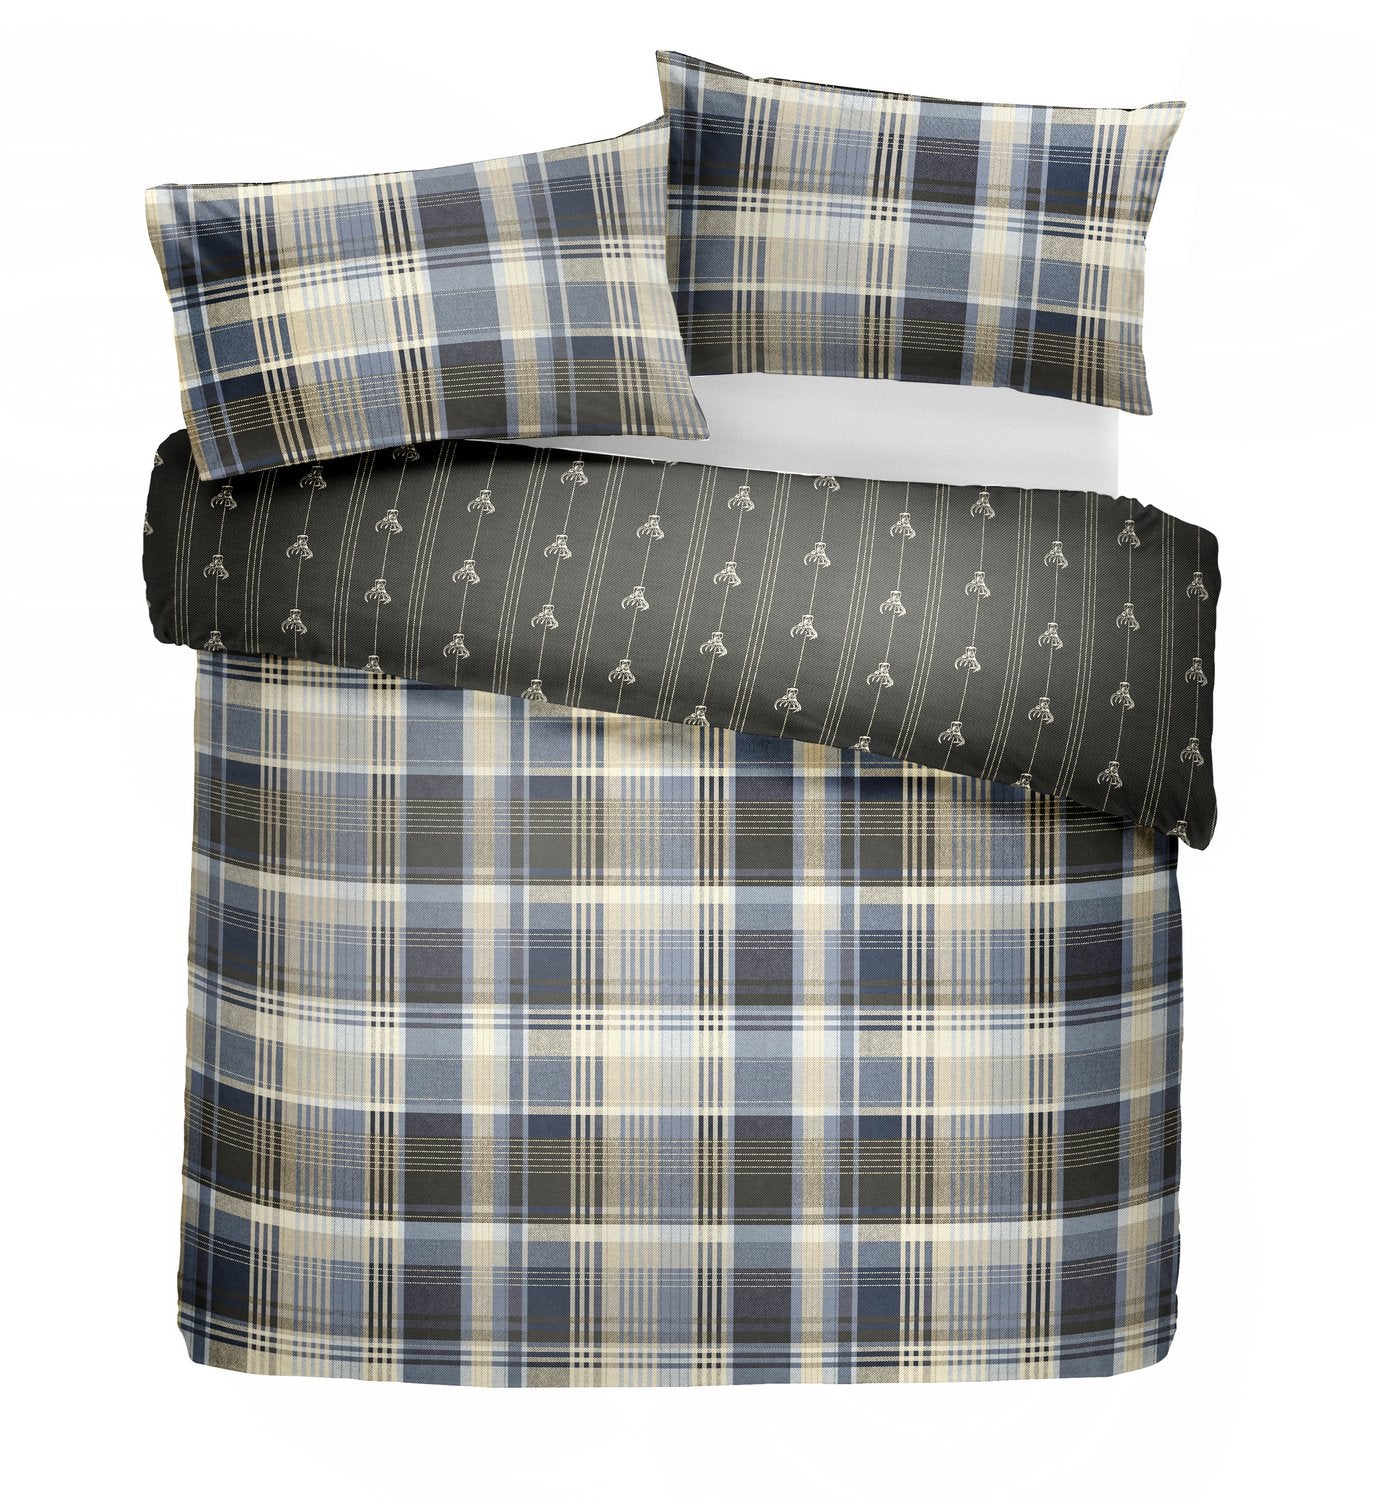 Connolly Charcoal Check Brushed Cotton Duvet Set